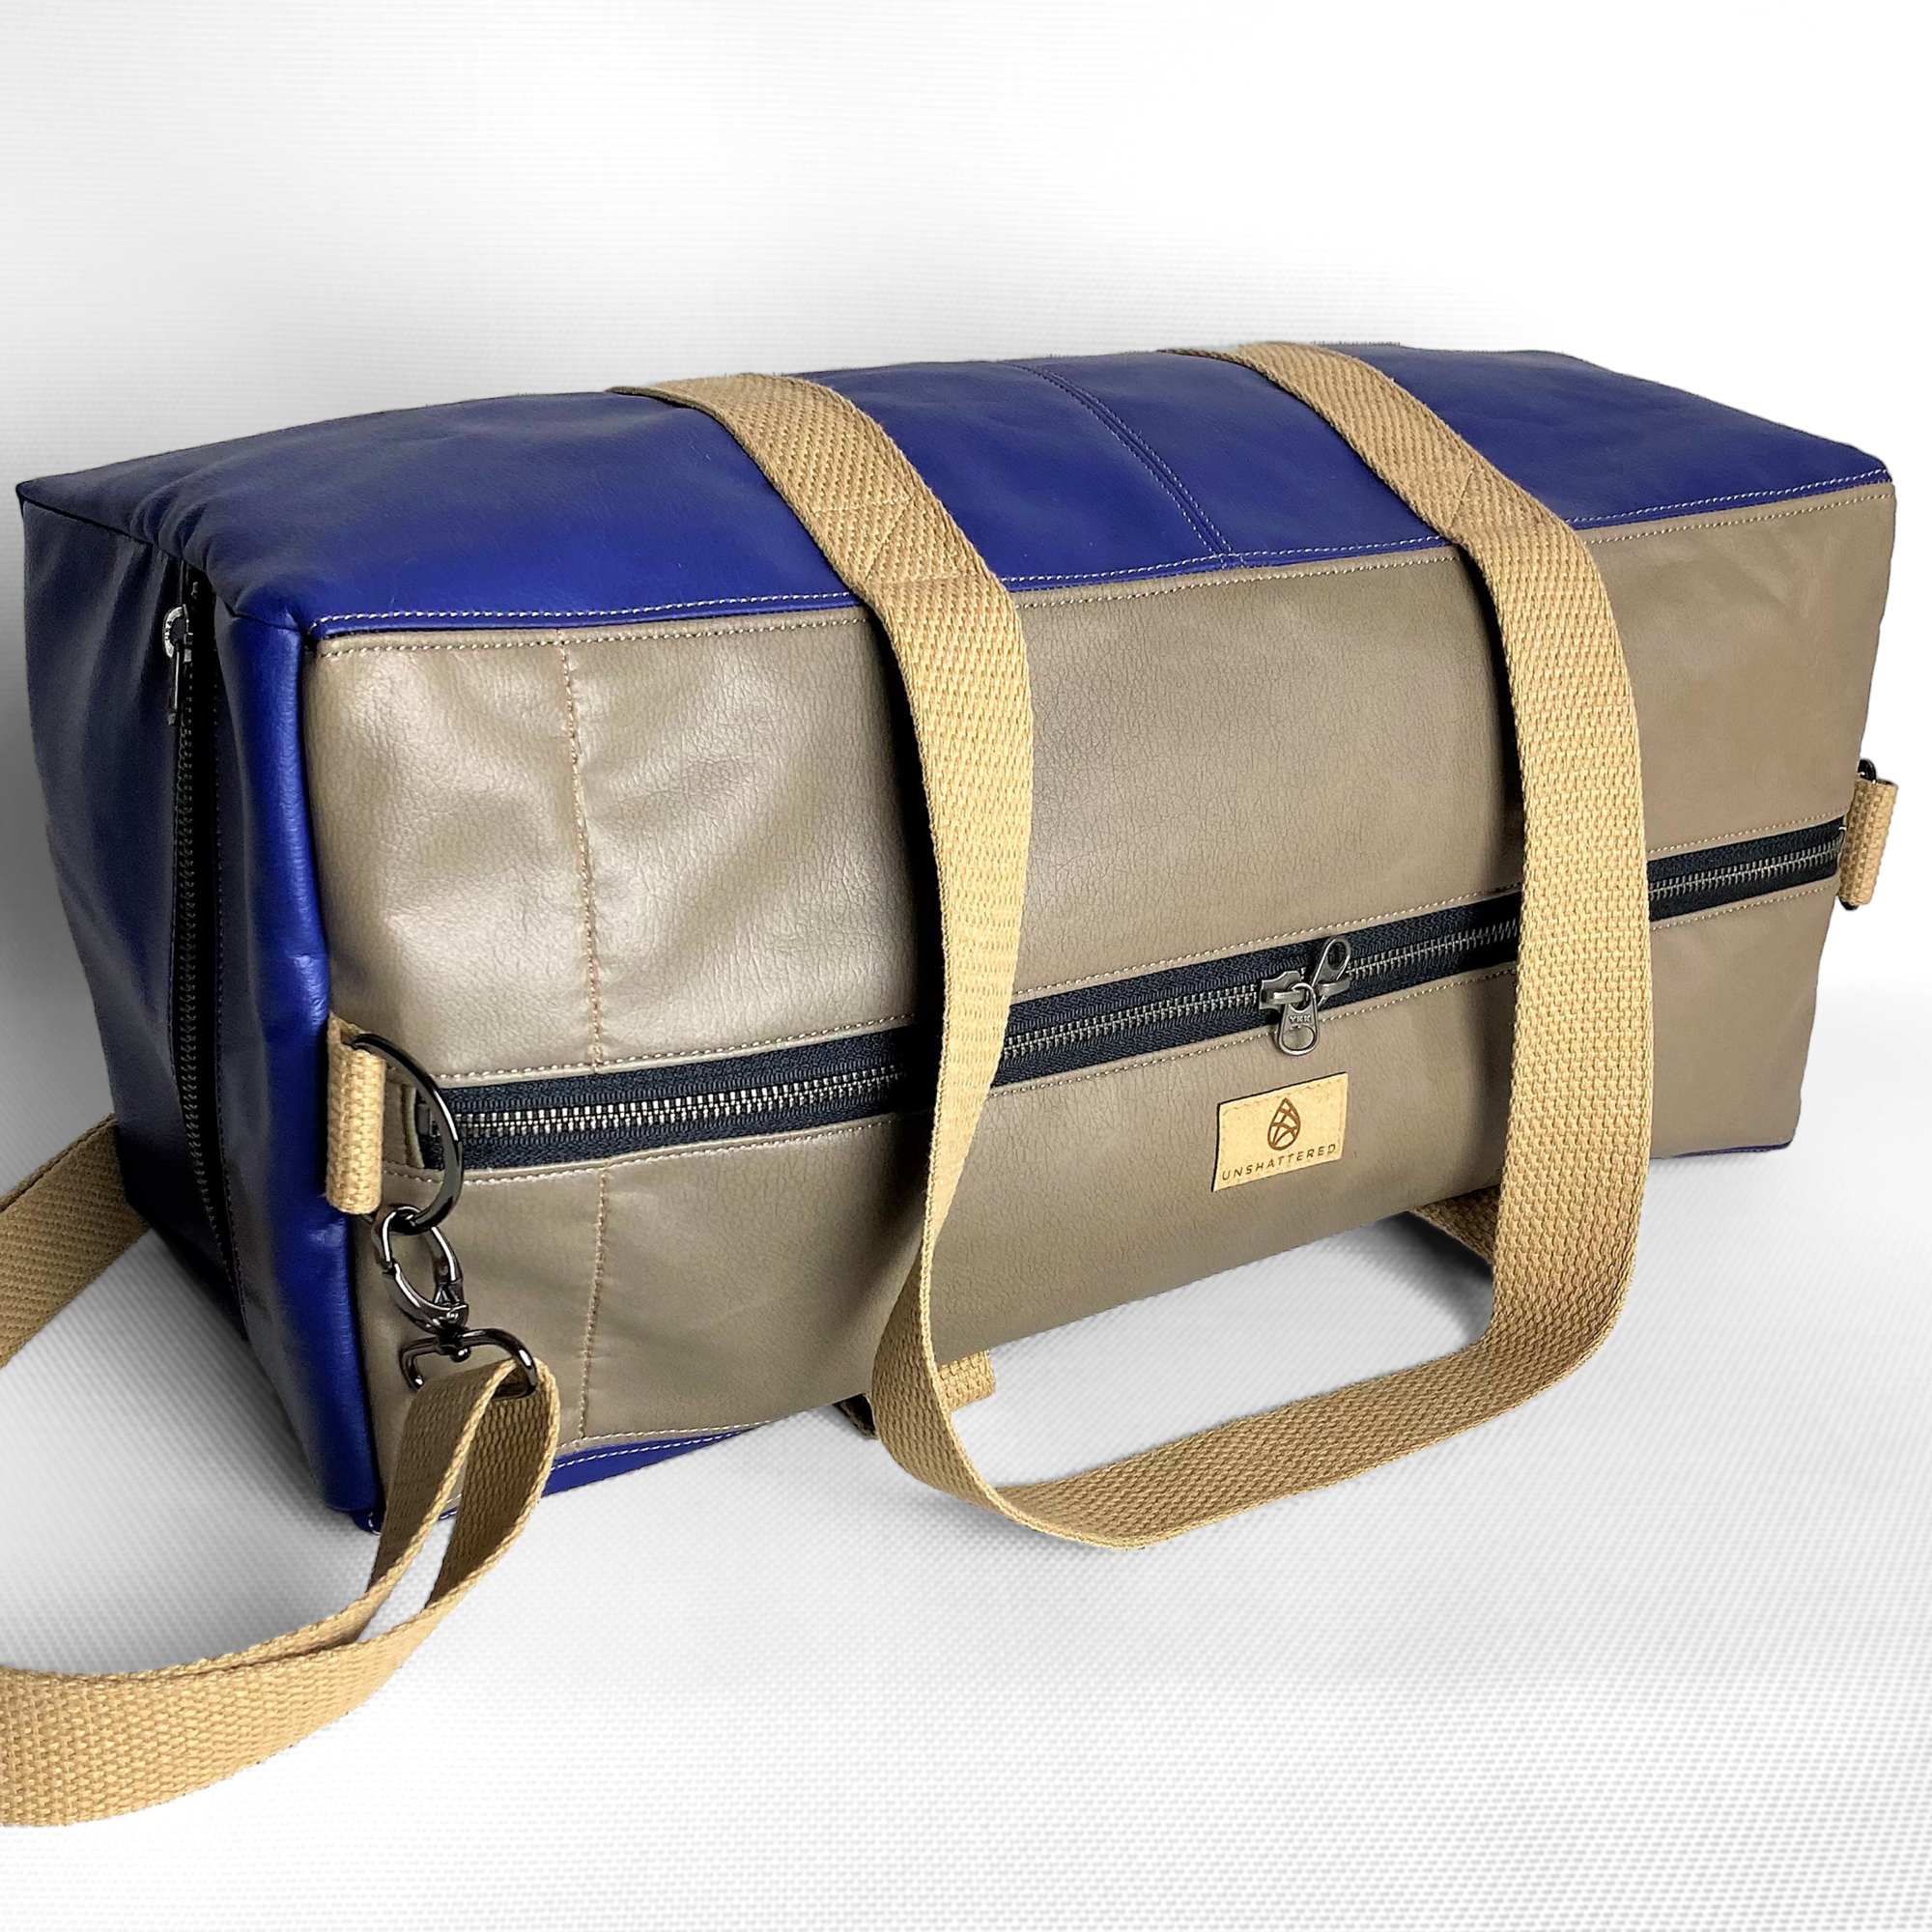 Duffle Bag from Southwest Airlines Leather